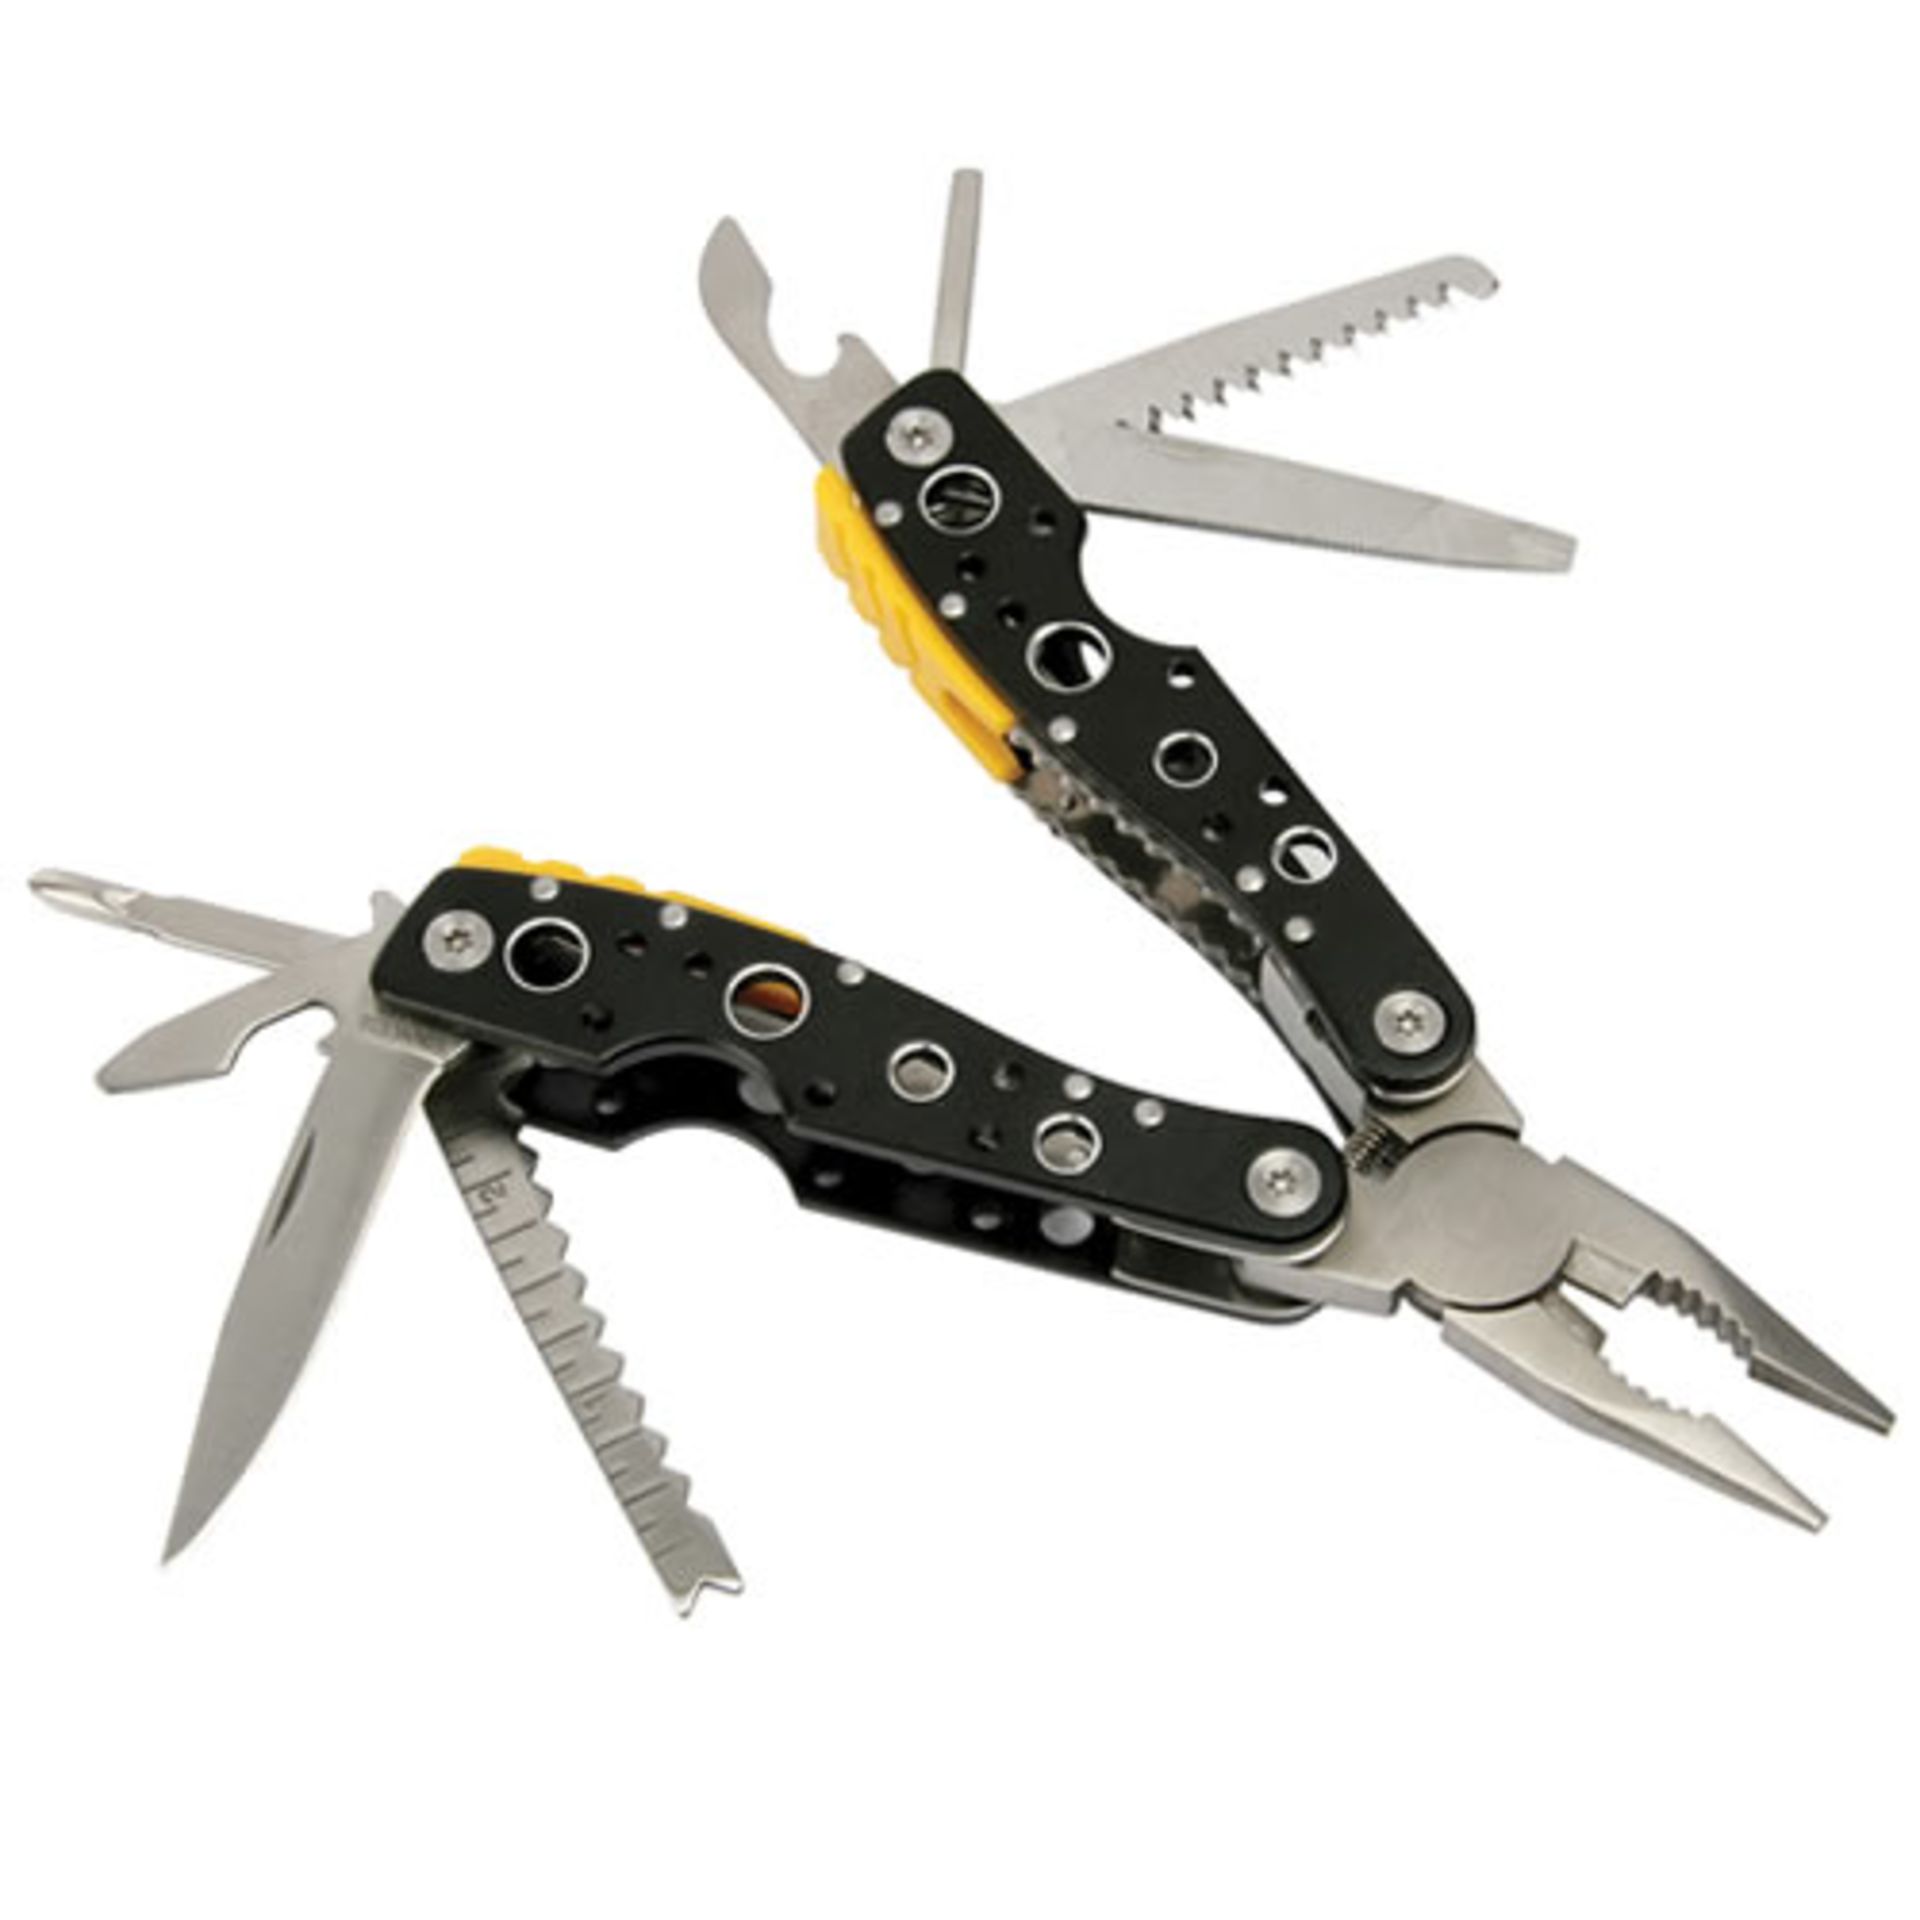 V 14 In 1 Multitool In Gift Box With Carry Pouch Aluminium Handles With Saw/Knife/Hook/Can Opener - Image 2 of 3